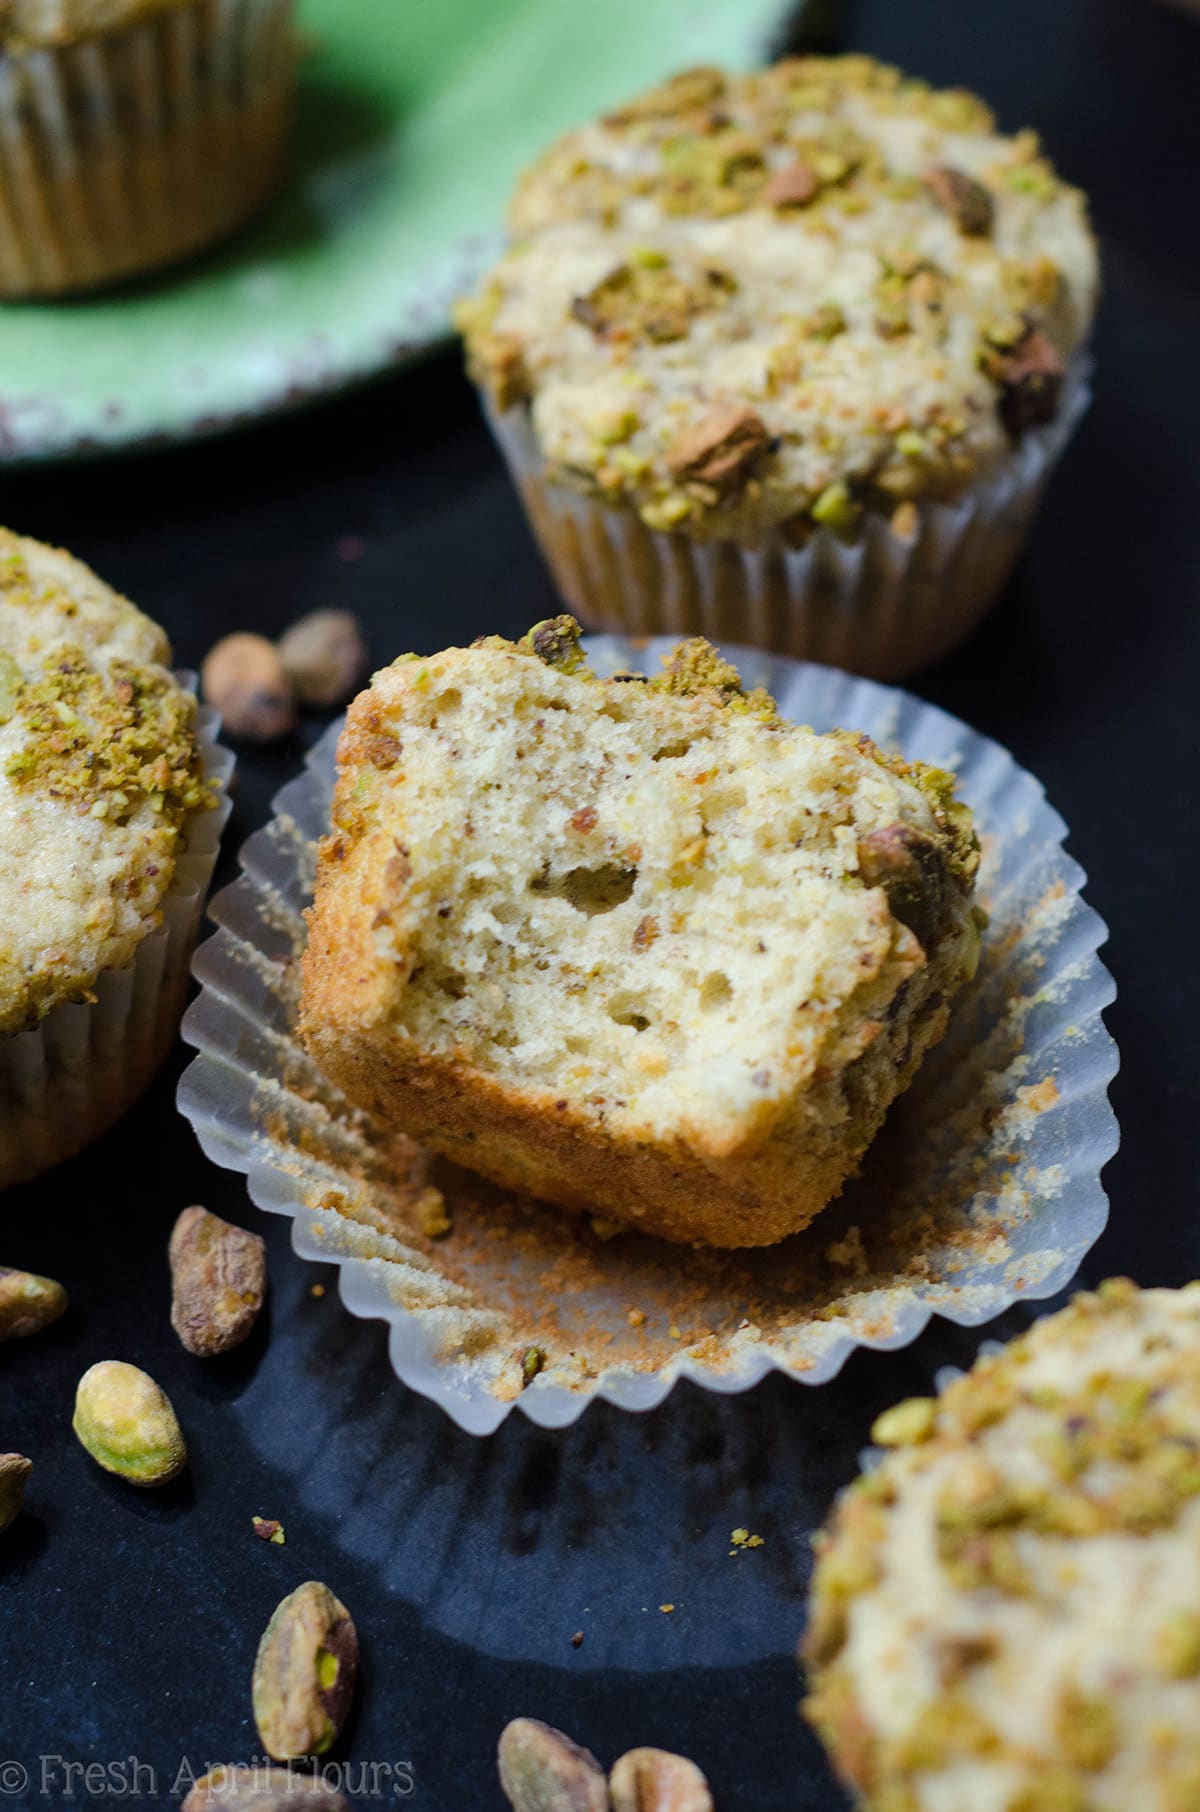 Pistachio Muffins: Moist and tender muffins naturally flavored with finely ground pistachios.